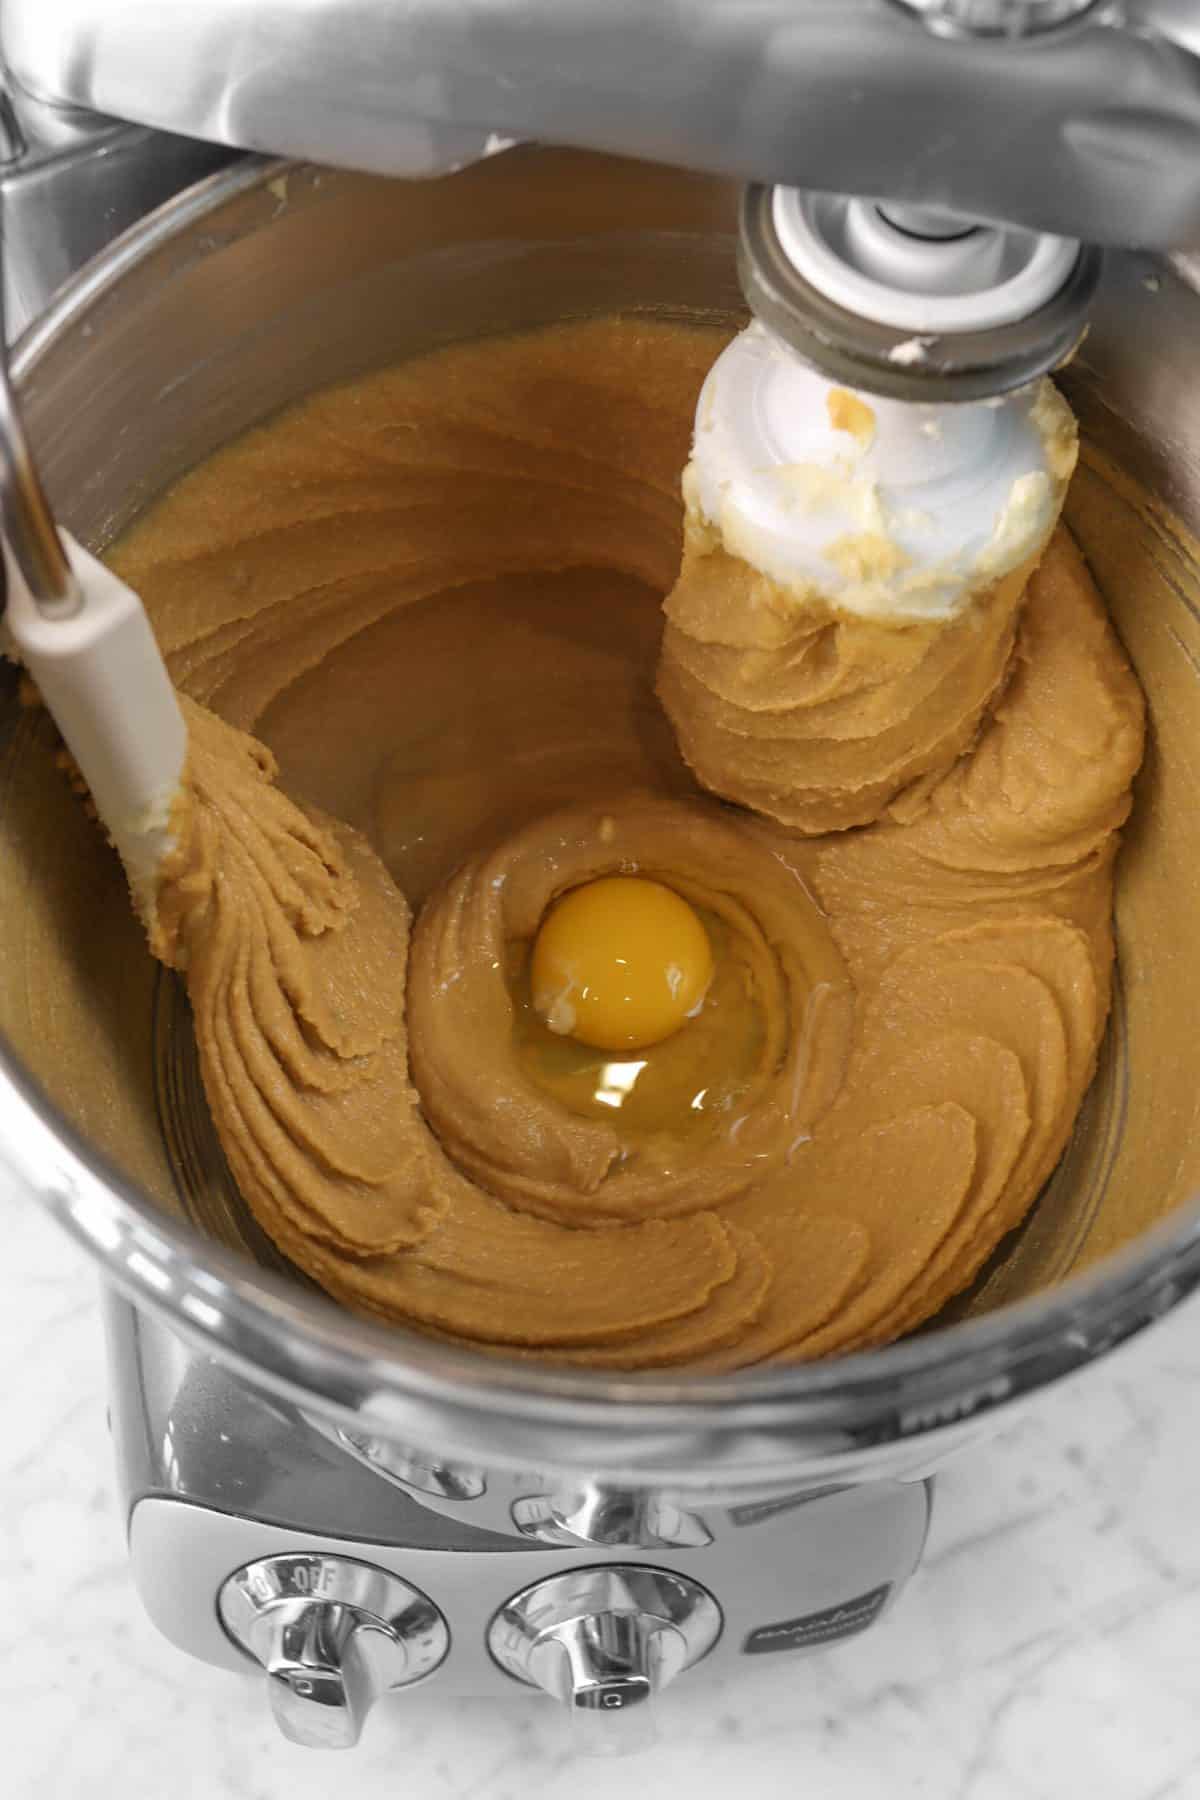 egg added to peanut butter mixture